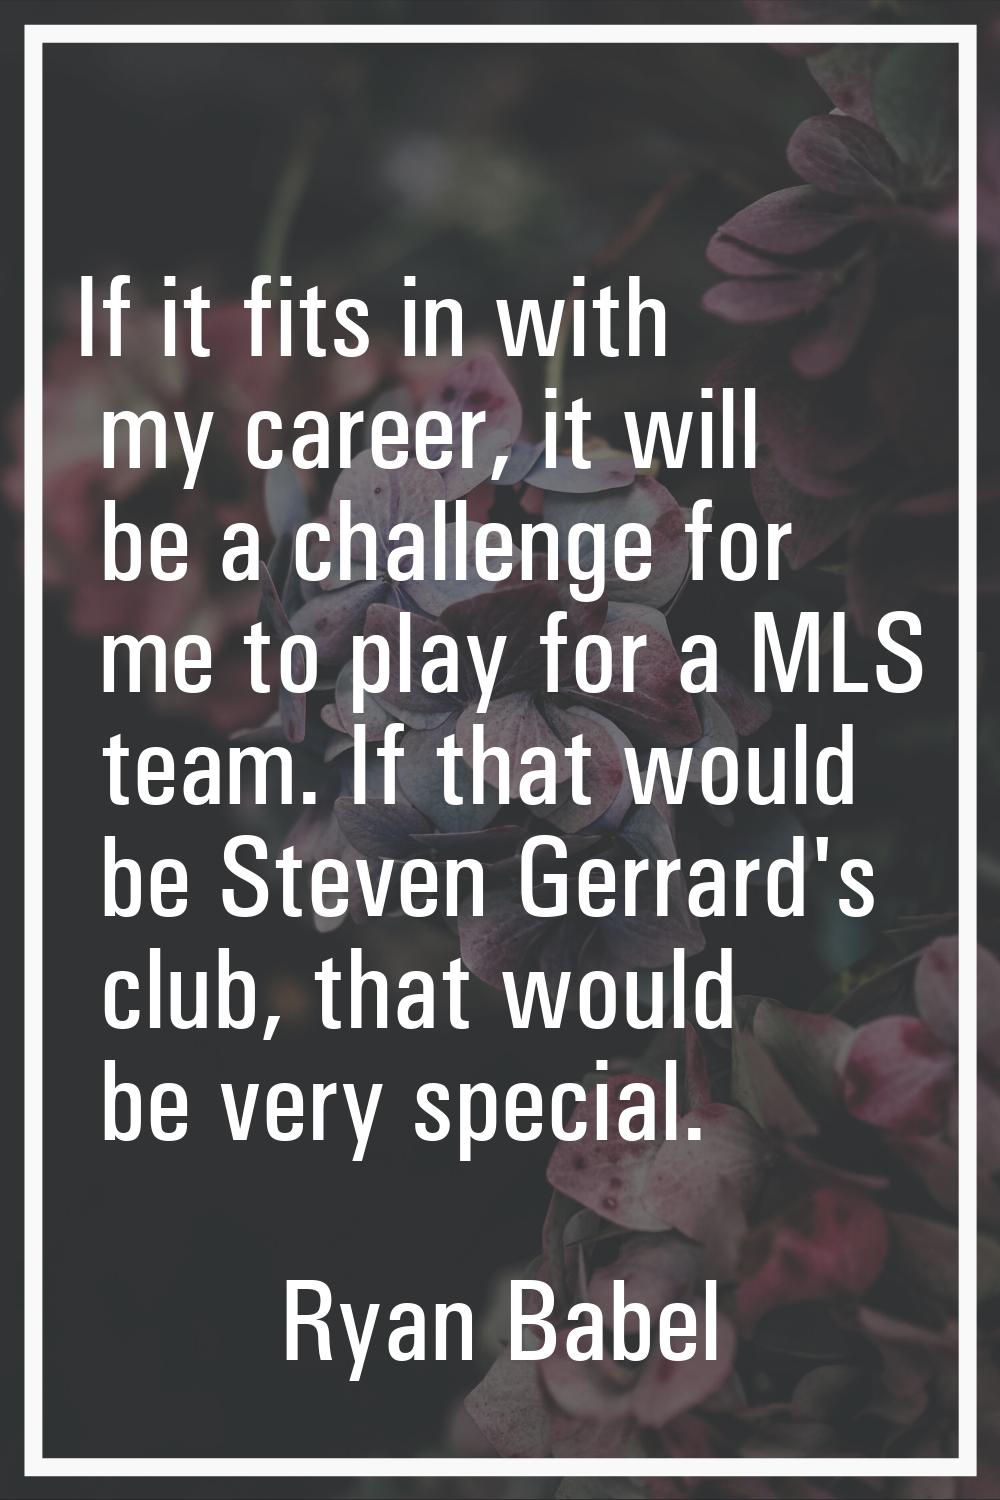 If it fits in with my career, it will be a challenge for me to play for a MLS team. If that would b